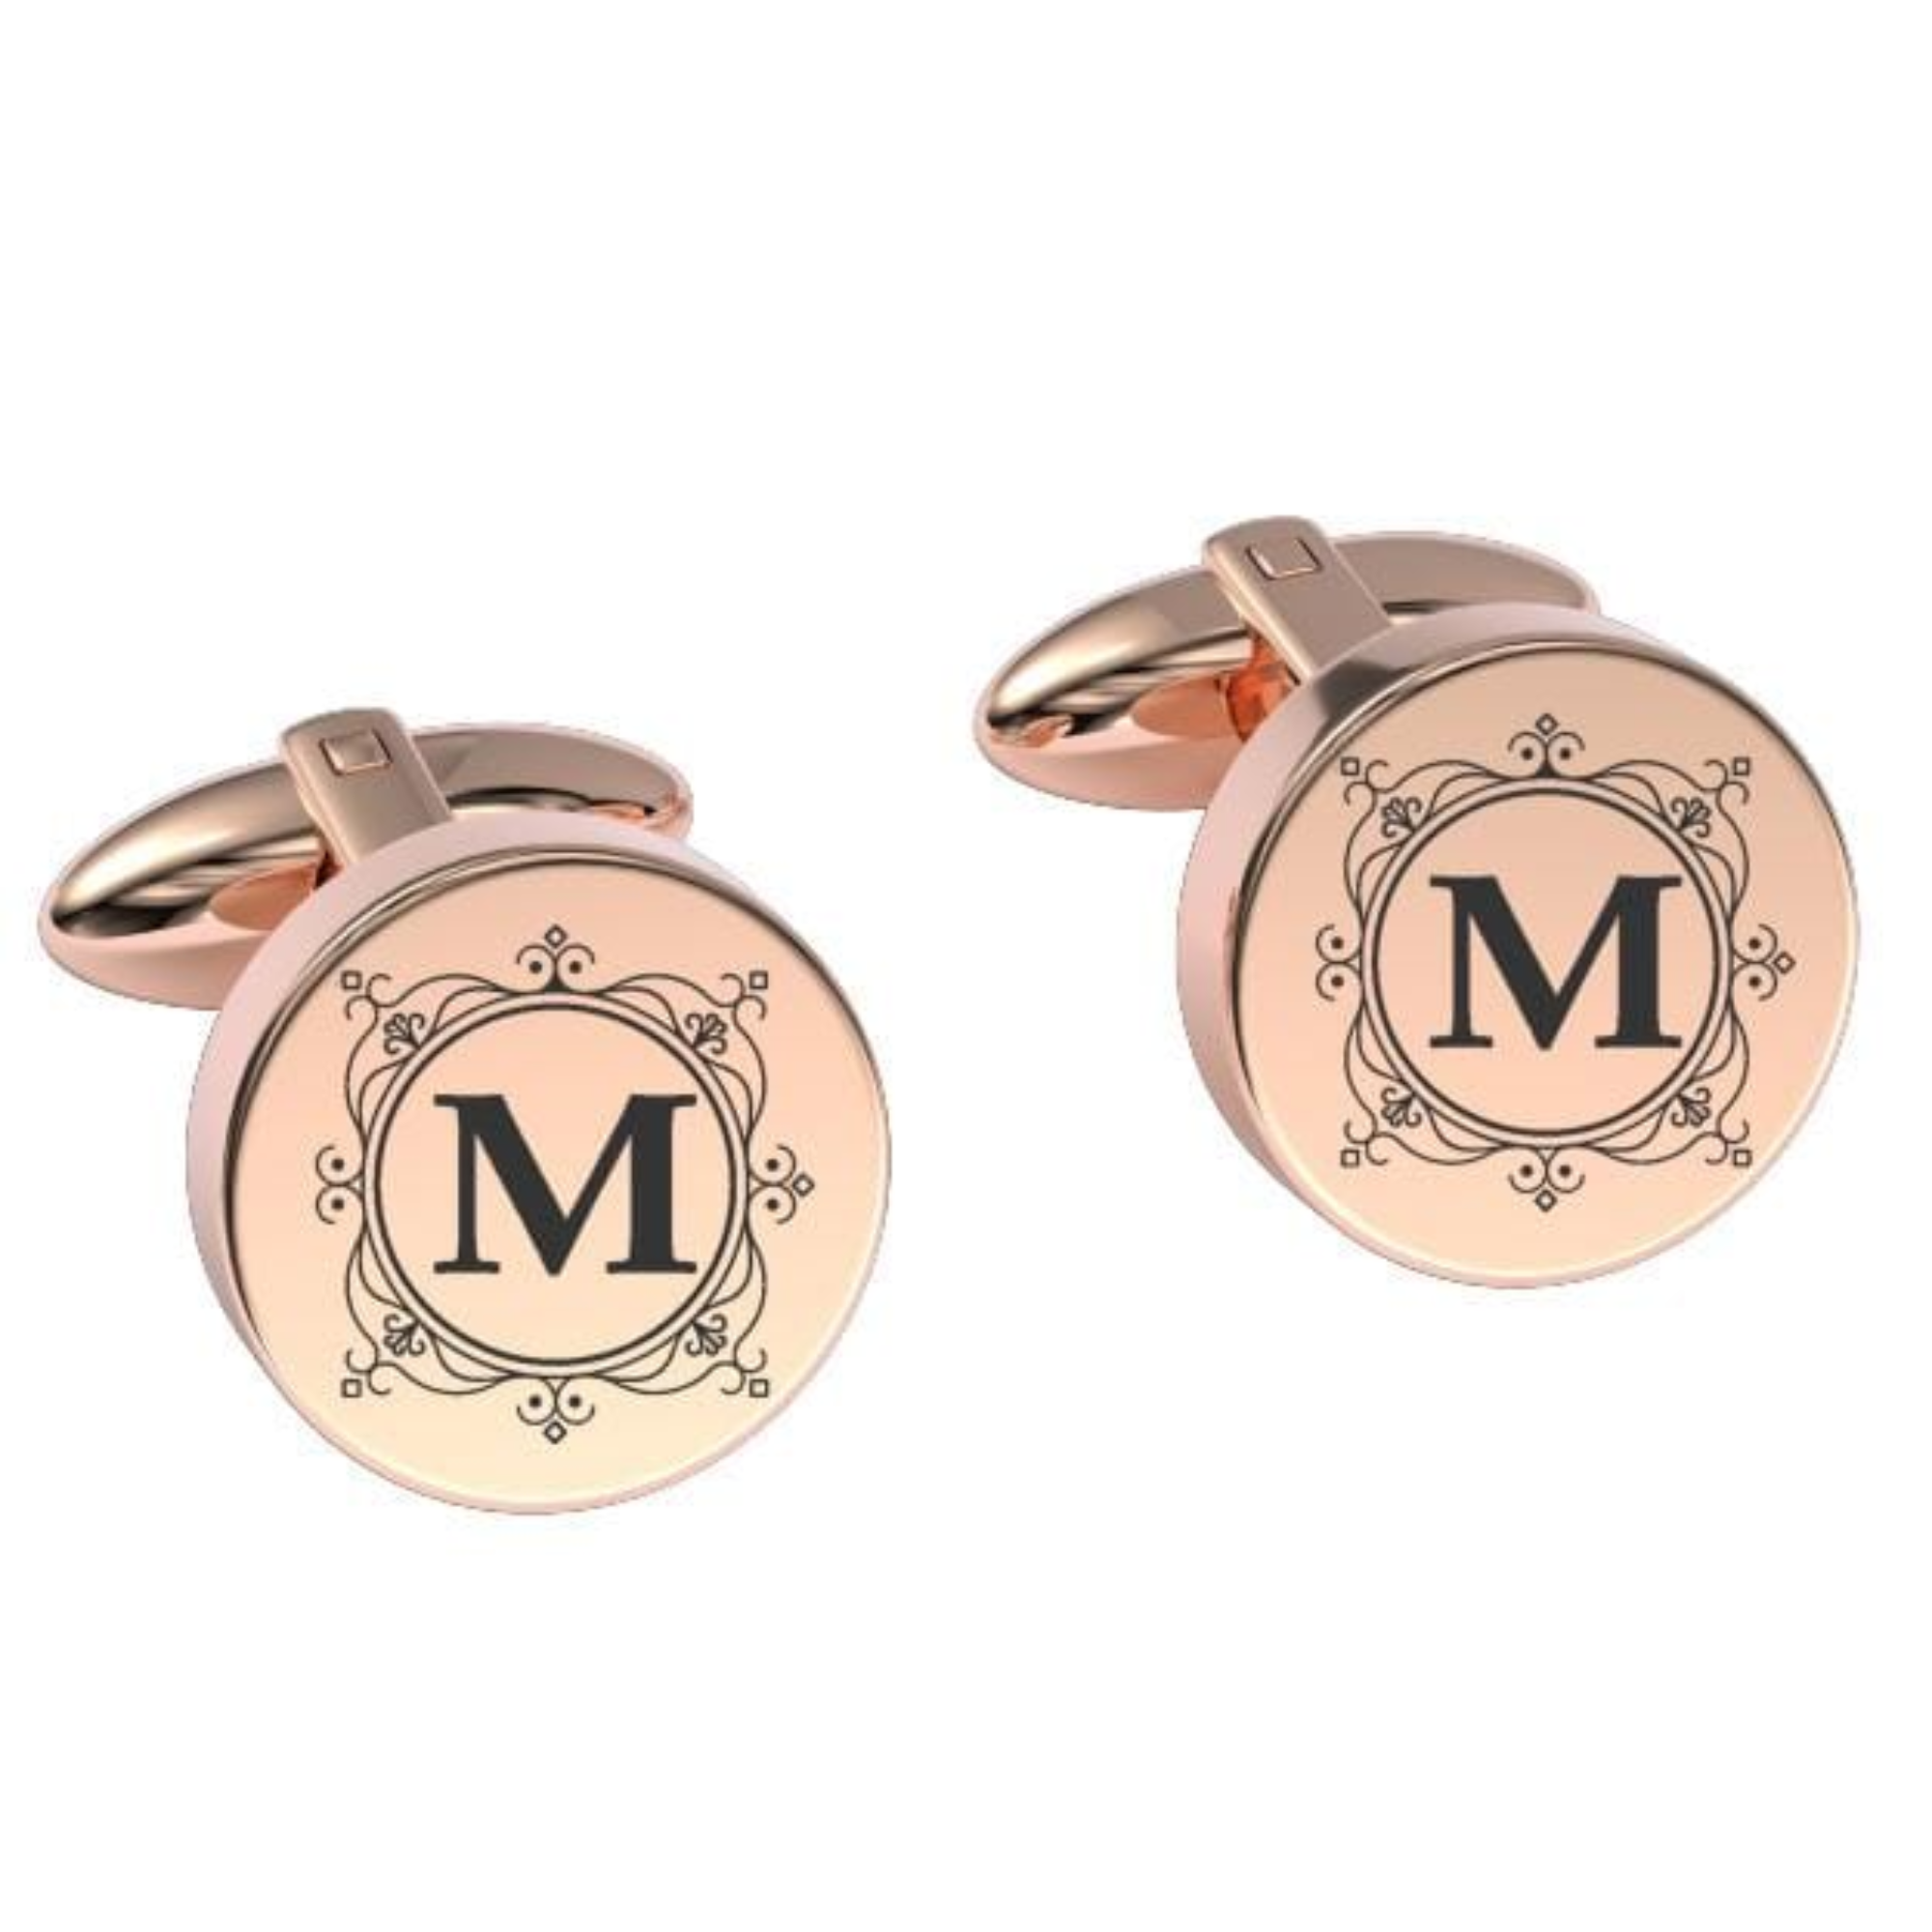 Decorated Round Initials Engraved Cufflinks in Rose Gold